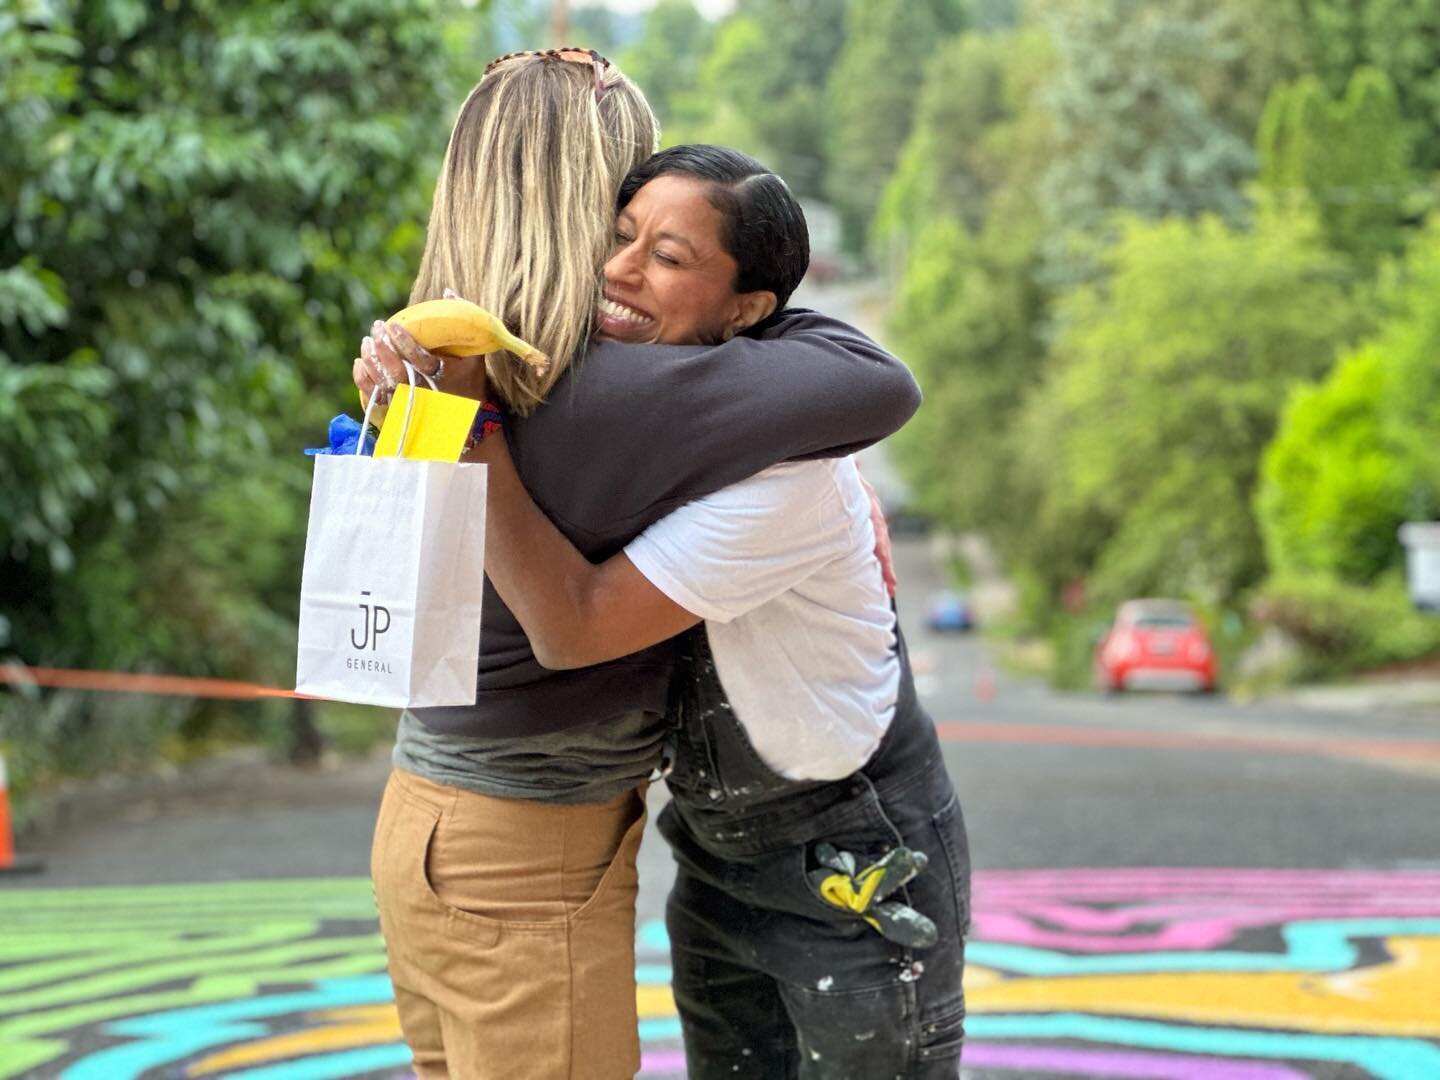 Our mural artist @curlieturtle and community events co-chair @cesannes hug as the day comes to an end.  Thank you again Amaranta for brining your art to our community. 

And thank you @jpgeneralshop for your continued support.